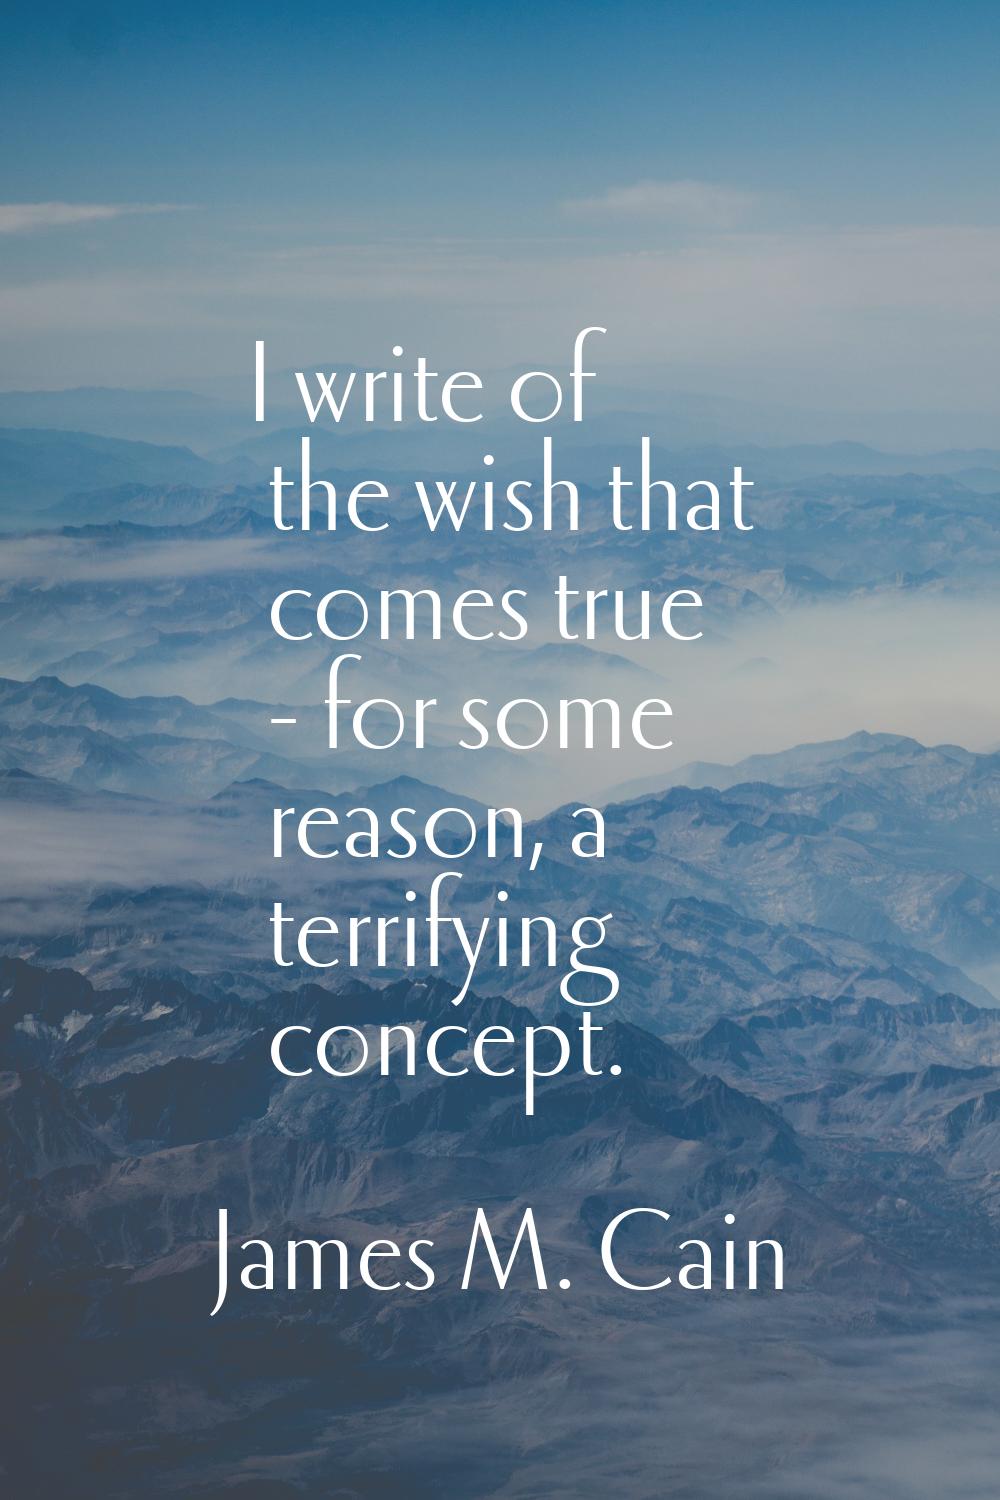 I write of the wish that comes true - for some reason, a terrifying concept.